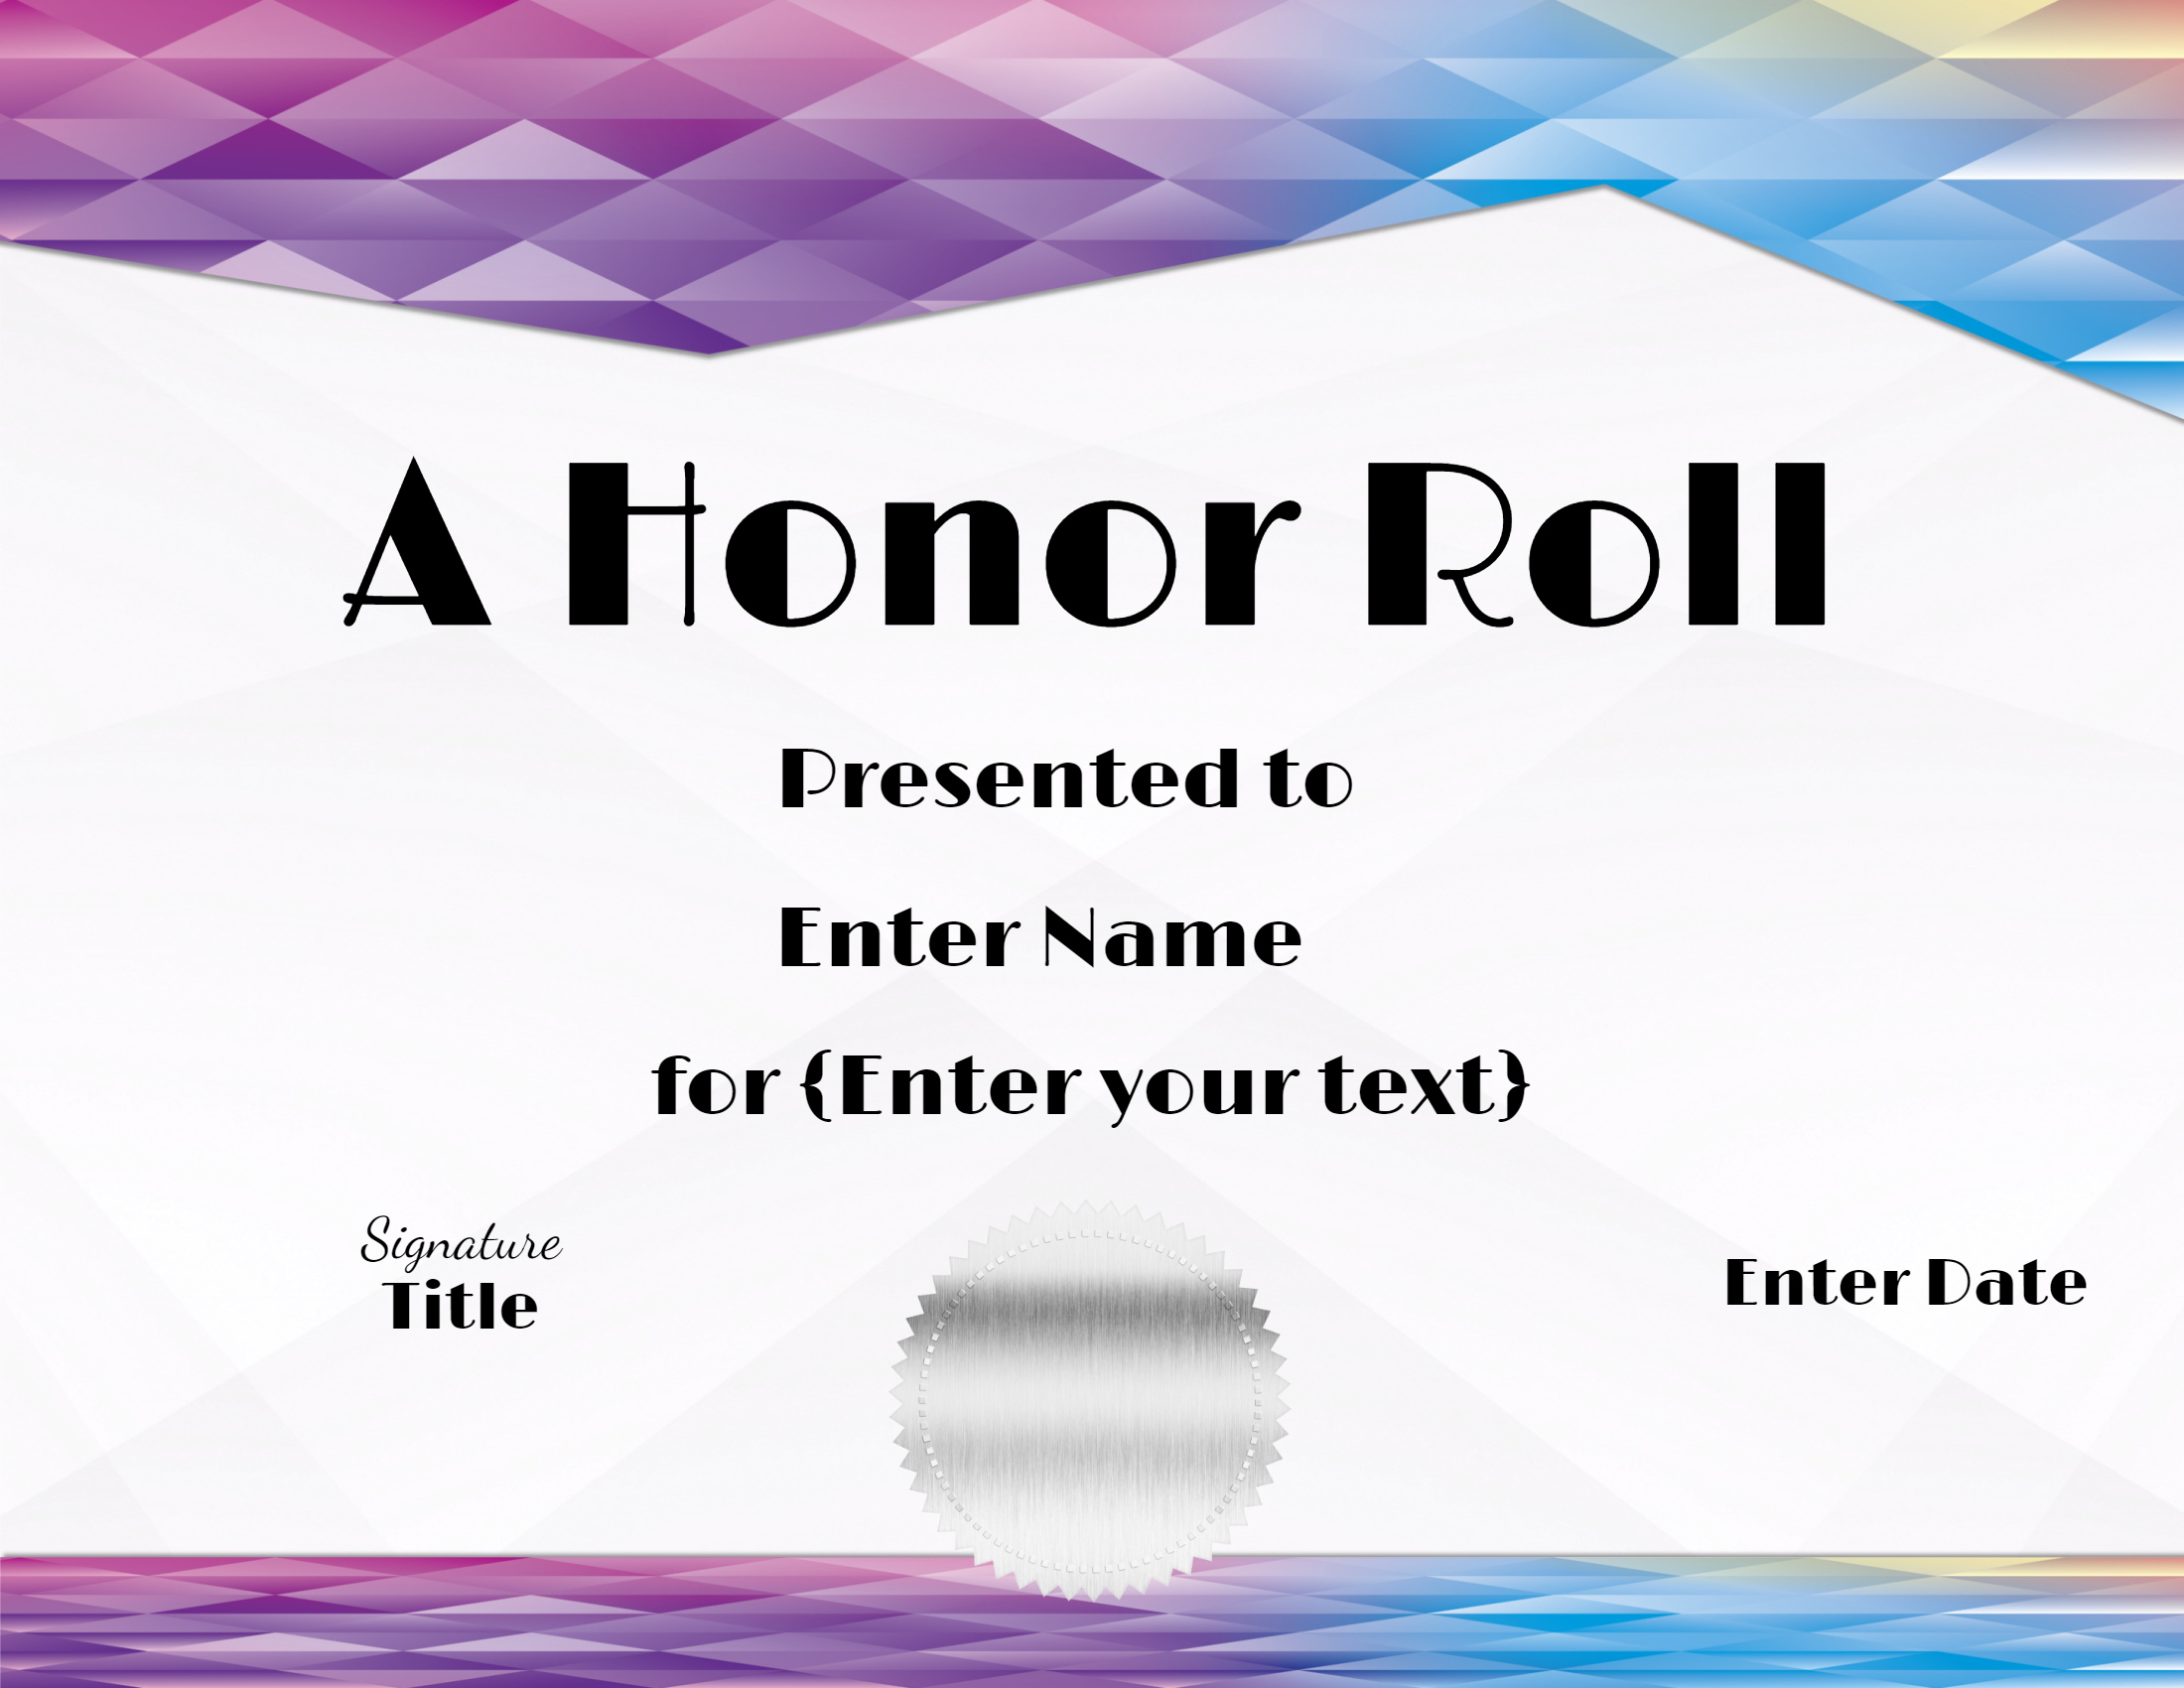 Free Honor Roll Certificate Templates  Customize Online with regard to Quality Editable Honor Roll Certificate Templates